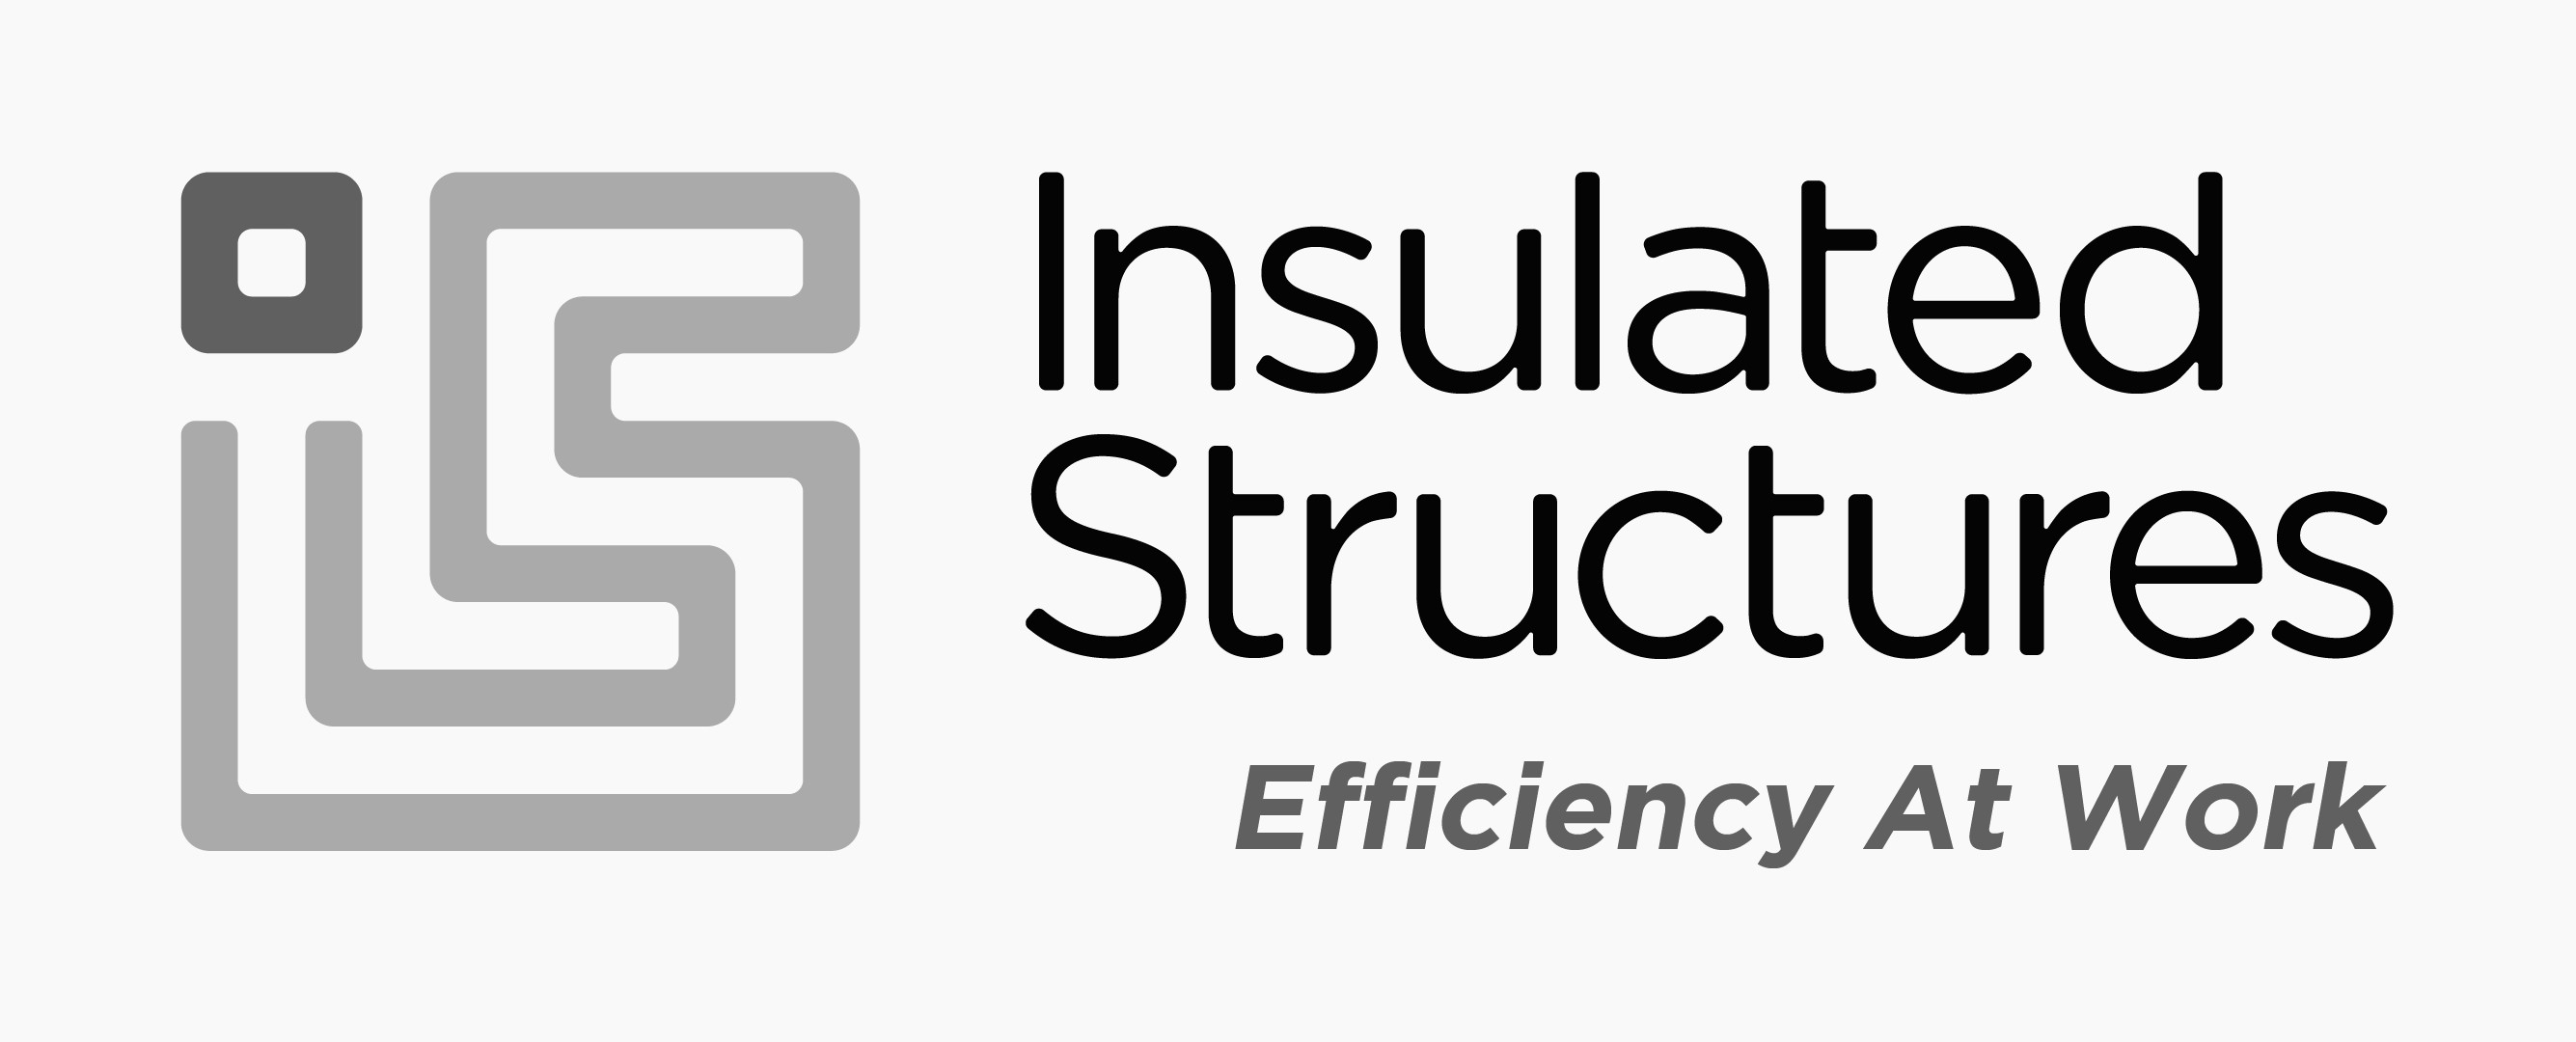 Insulated Structured Footer Logo